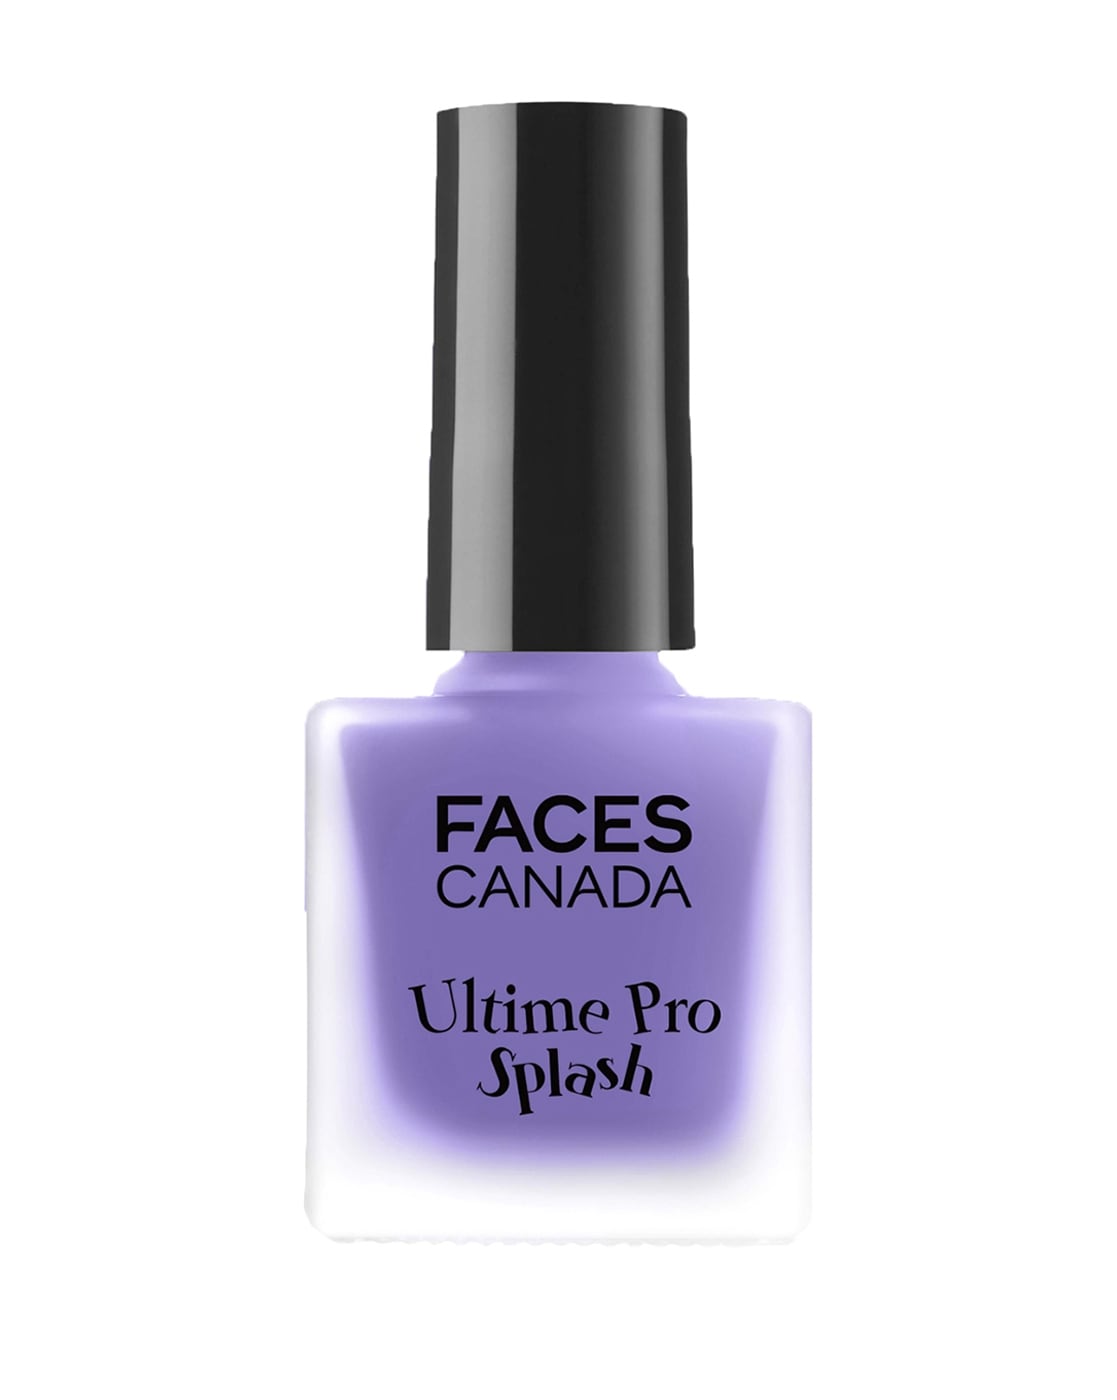 Buy Faces Splash Glossy Nail Enamel, Floral Dream 56, 8 ml & Faces Canada  Splash Glossy Nail Enamel, White O White 14, 8 ml Online at Low Prices in  India - Amazon.in